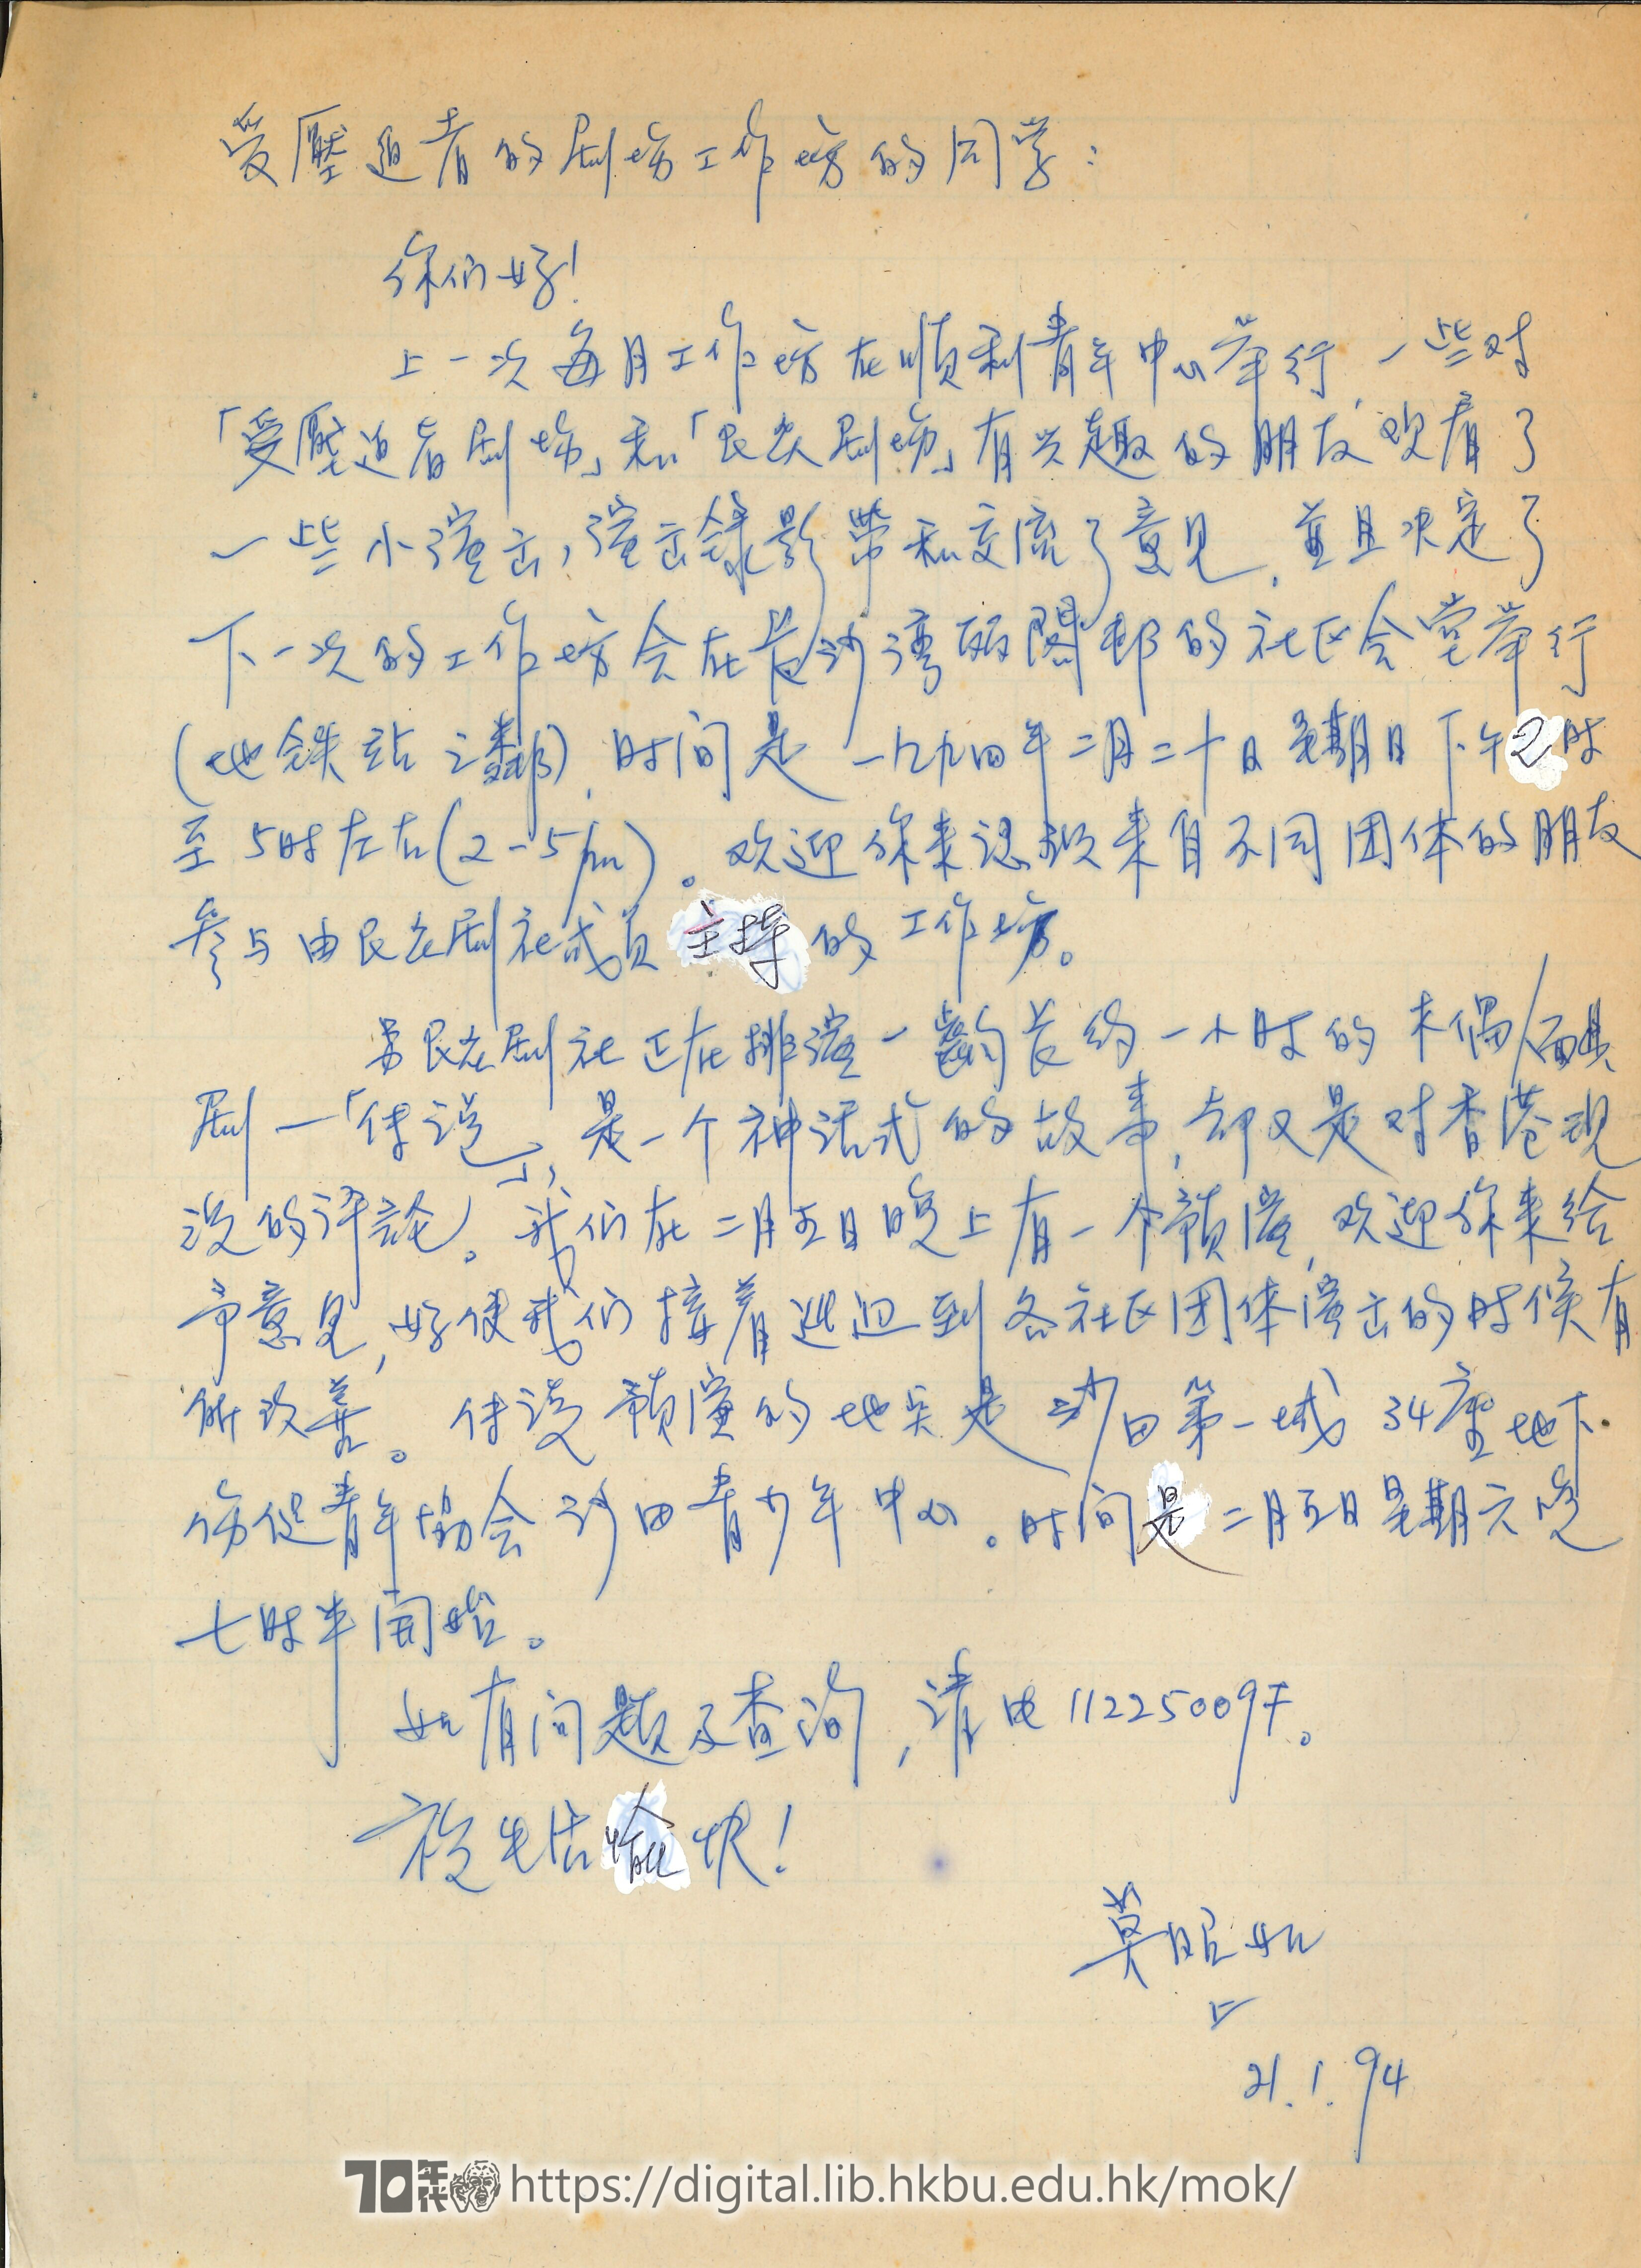   Letter from Mok Chiu Yu to students of The Theatre of the Opressed Workshop MOK, Chiu Yu 